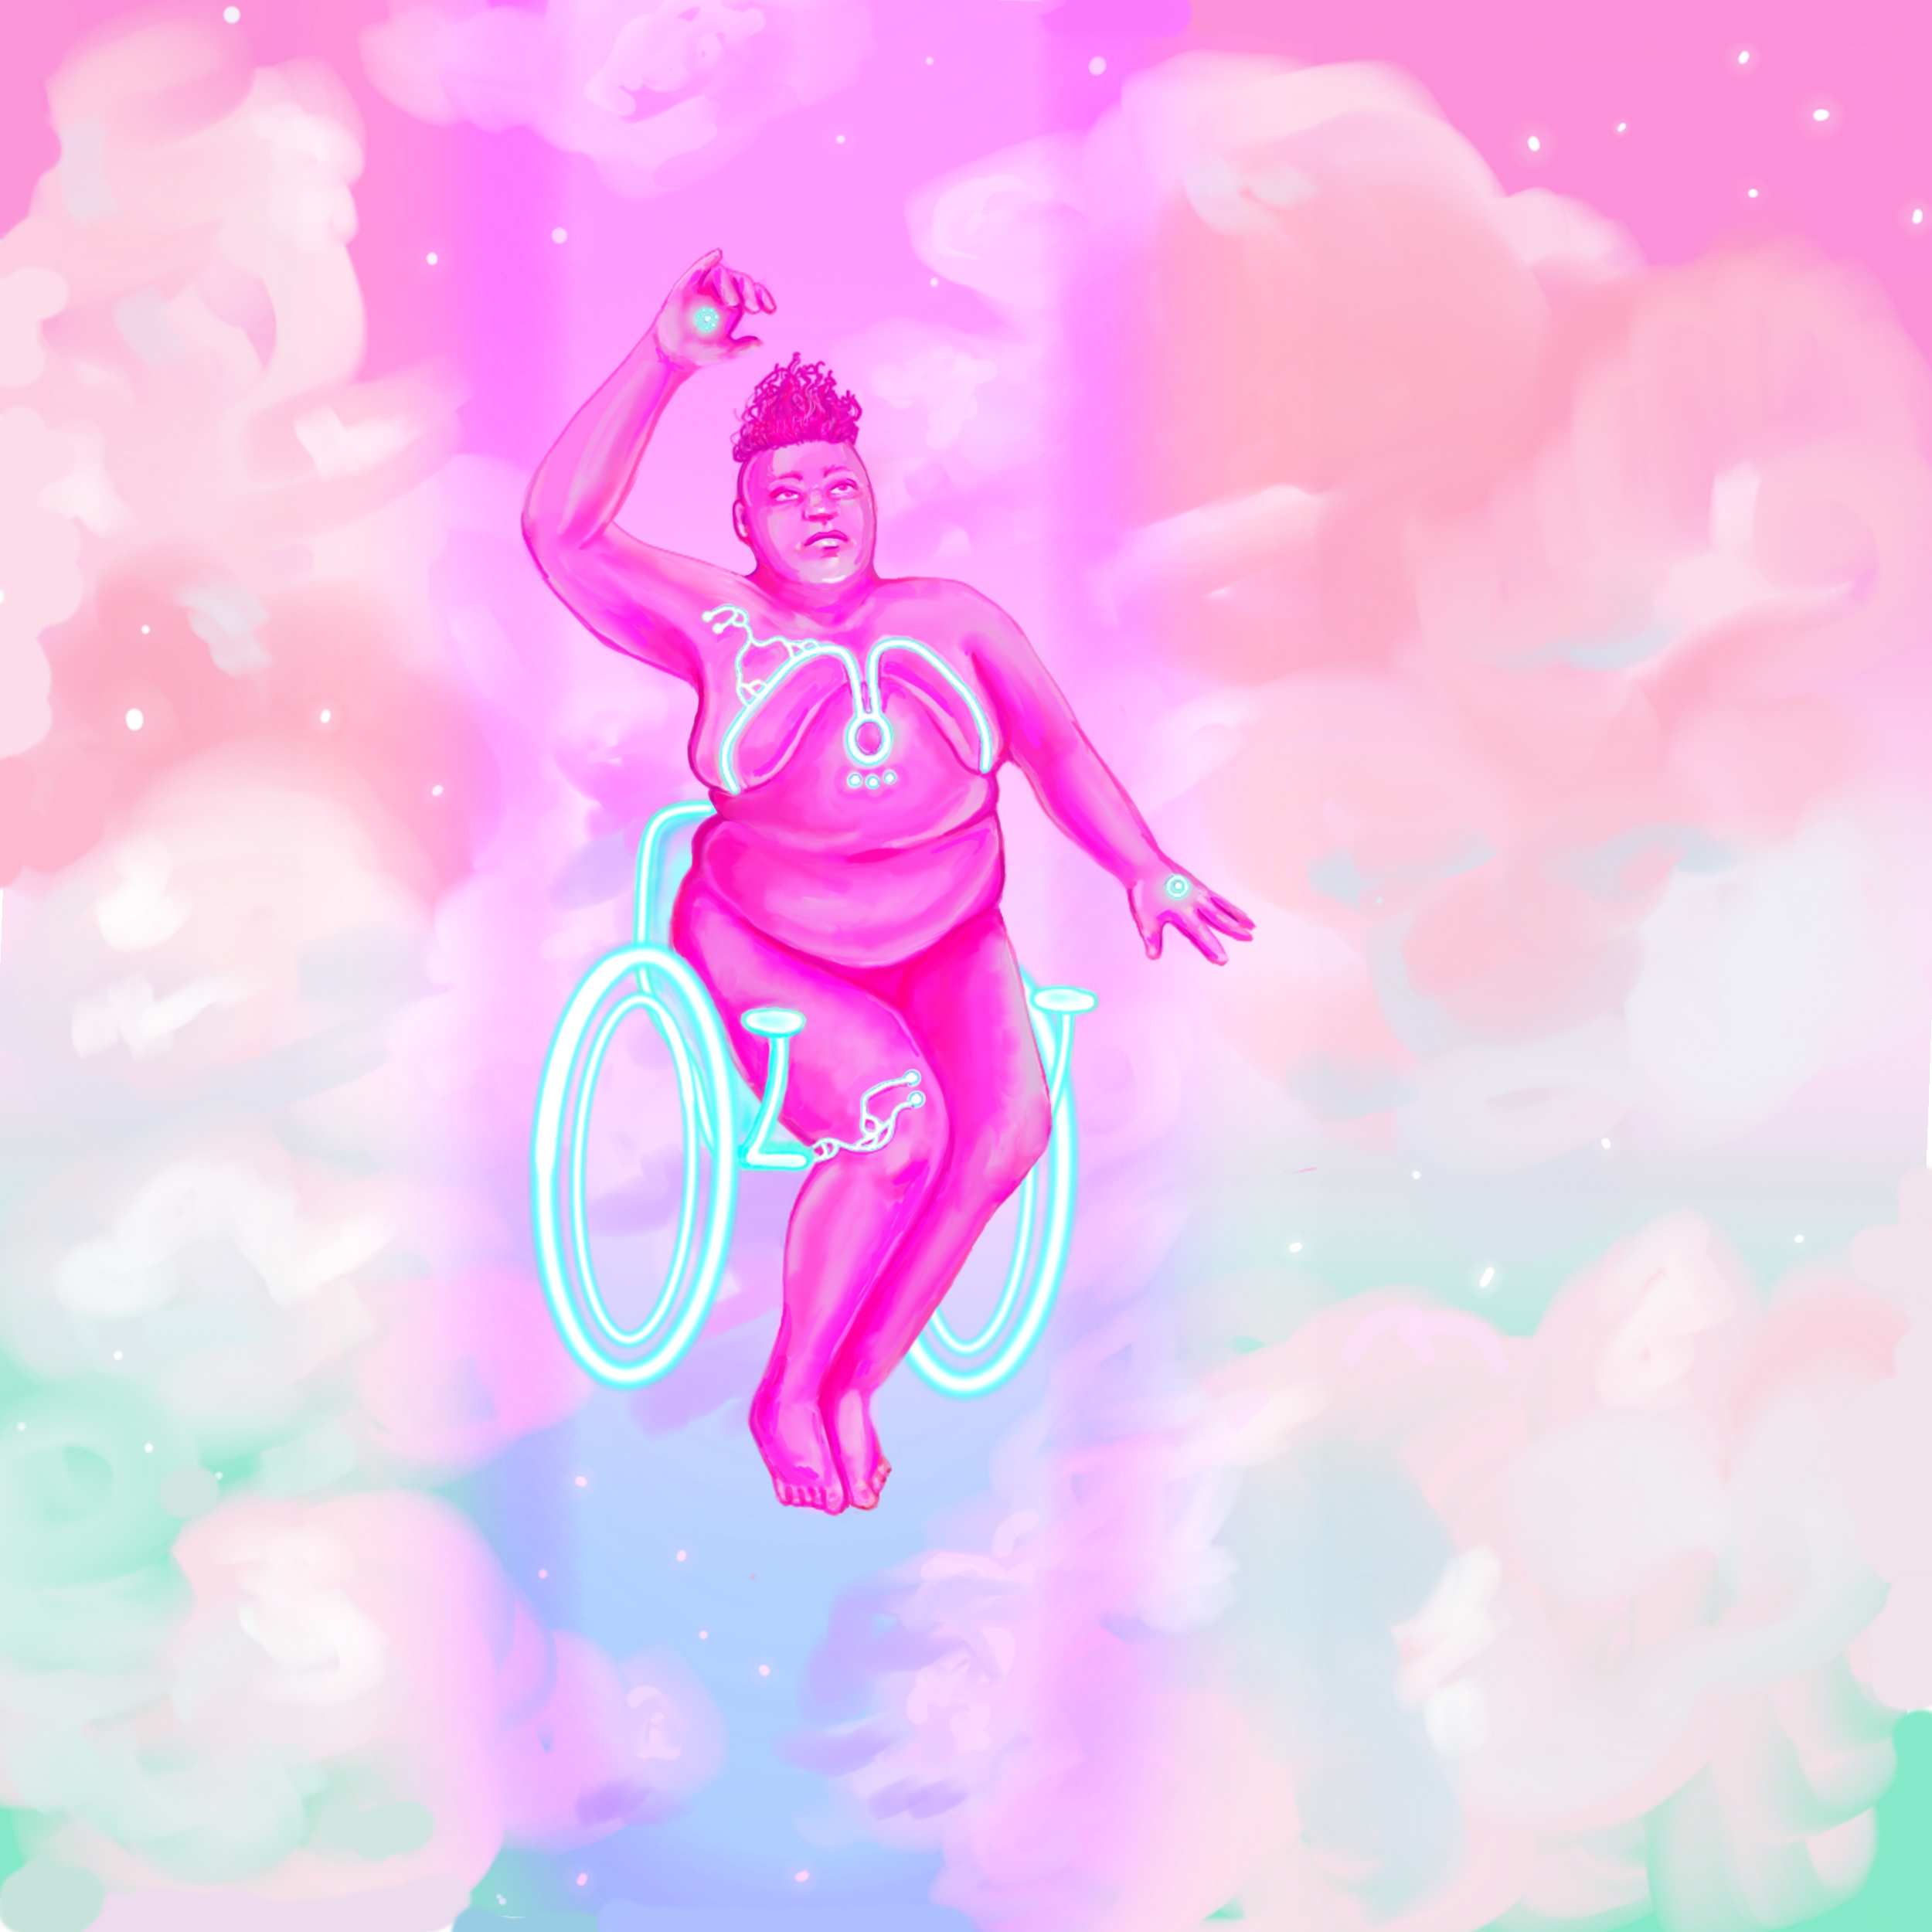 A bright pink figure floats against a backround of pink, white and bright green clouds and stars. They are sitting on a futuristic looking mobility device with two weeks and handles — it appears to be made of a blue light. The same blue light appears as a design on their chest and in as dots in the ceentrer of their hands. Their right hand is raised, and their face looks solemnly upwards, and appear suspended in a column of particularly dense pink light or air. 